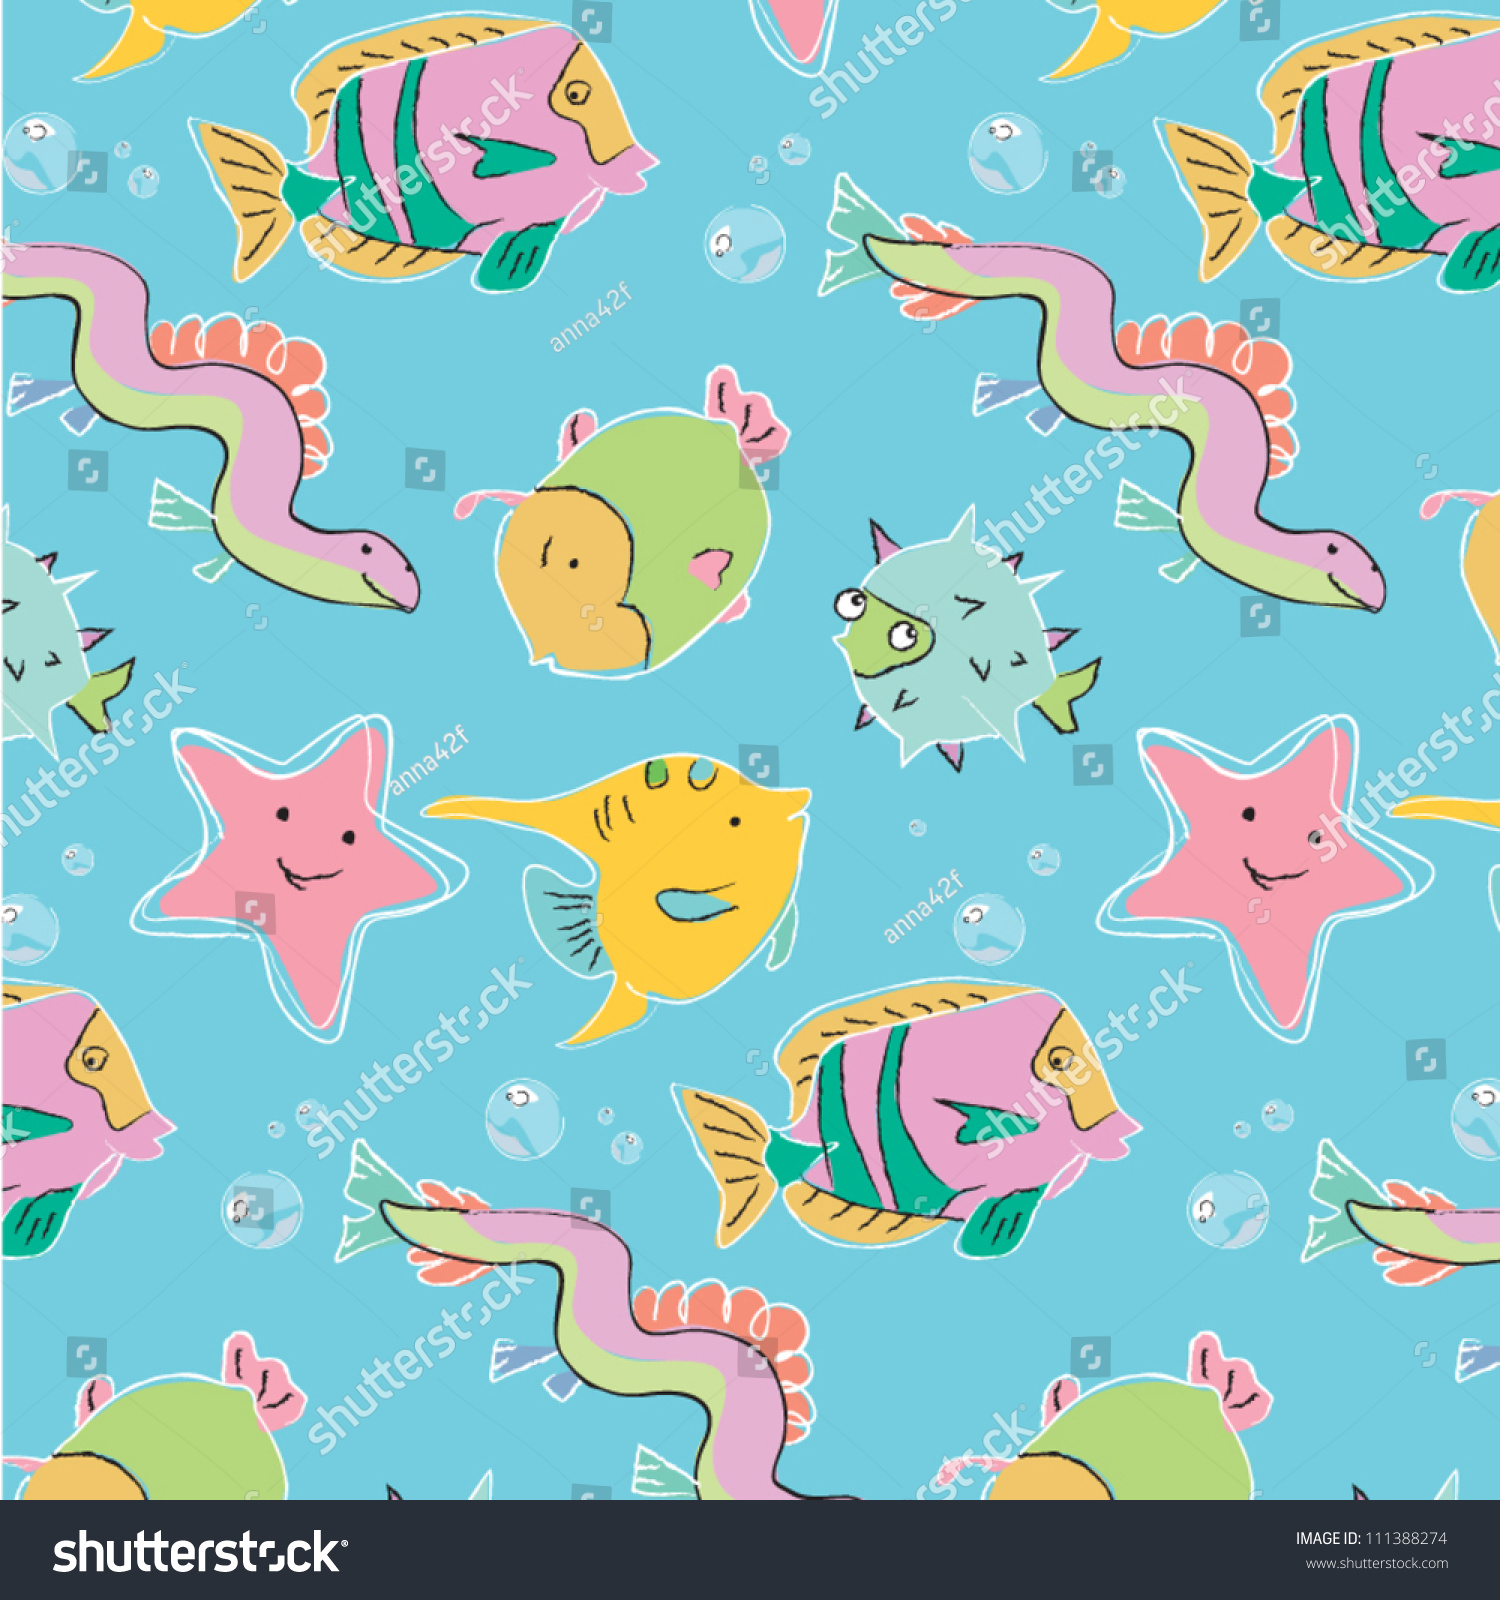 Baby Fish In Soft Colors - Marine Life. Potter Children'S Maritime ...